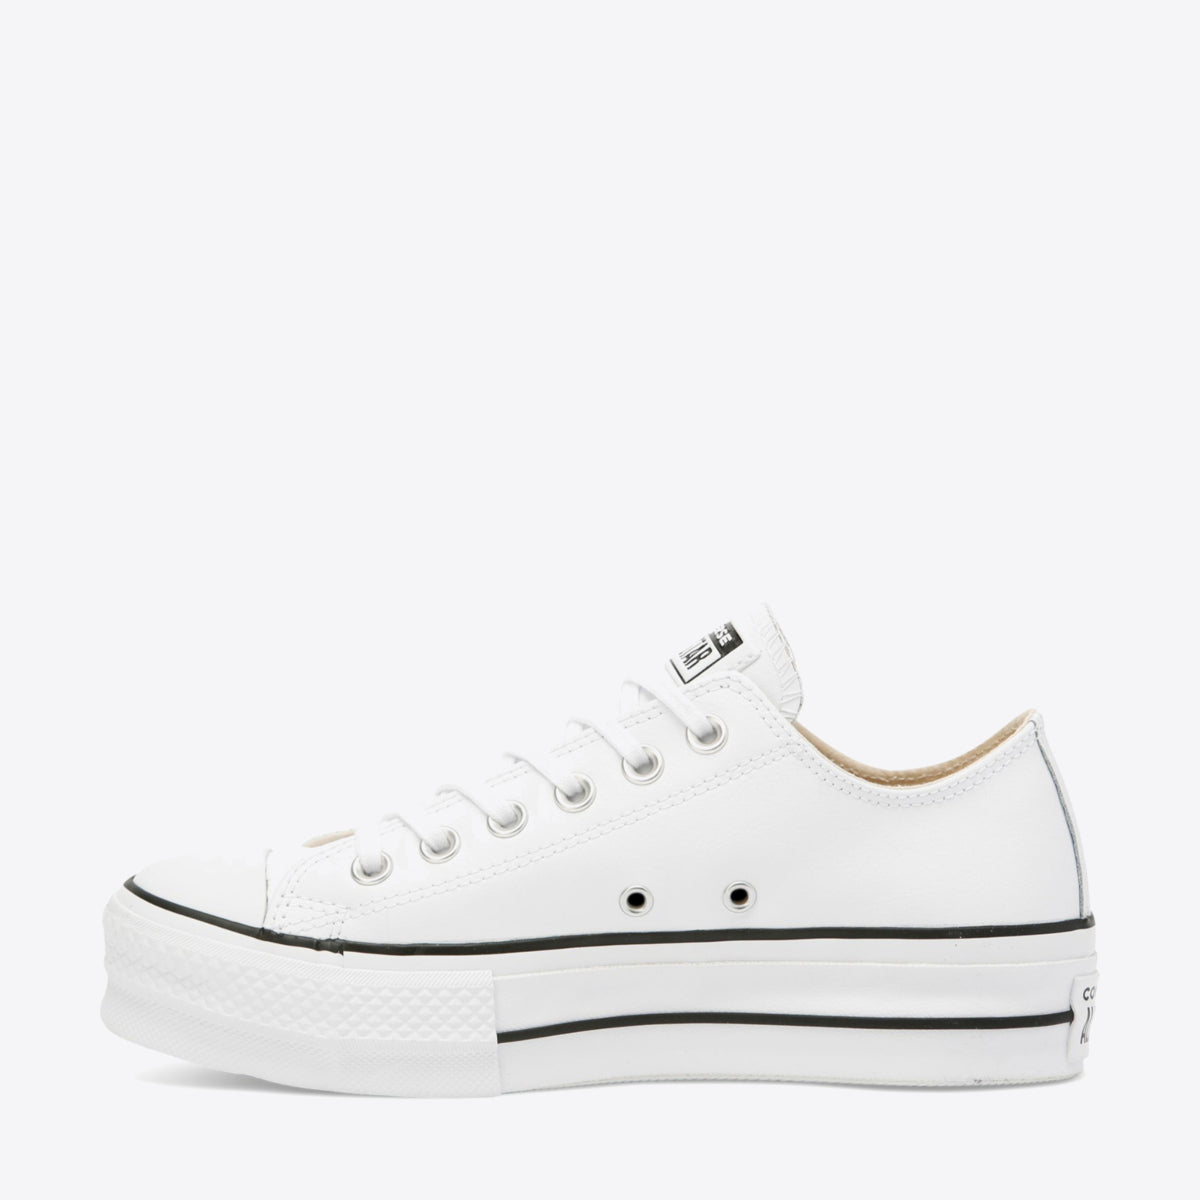 CONVERSE Chuck Taylor All Star Leather Lift Low White/Black - Image 0